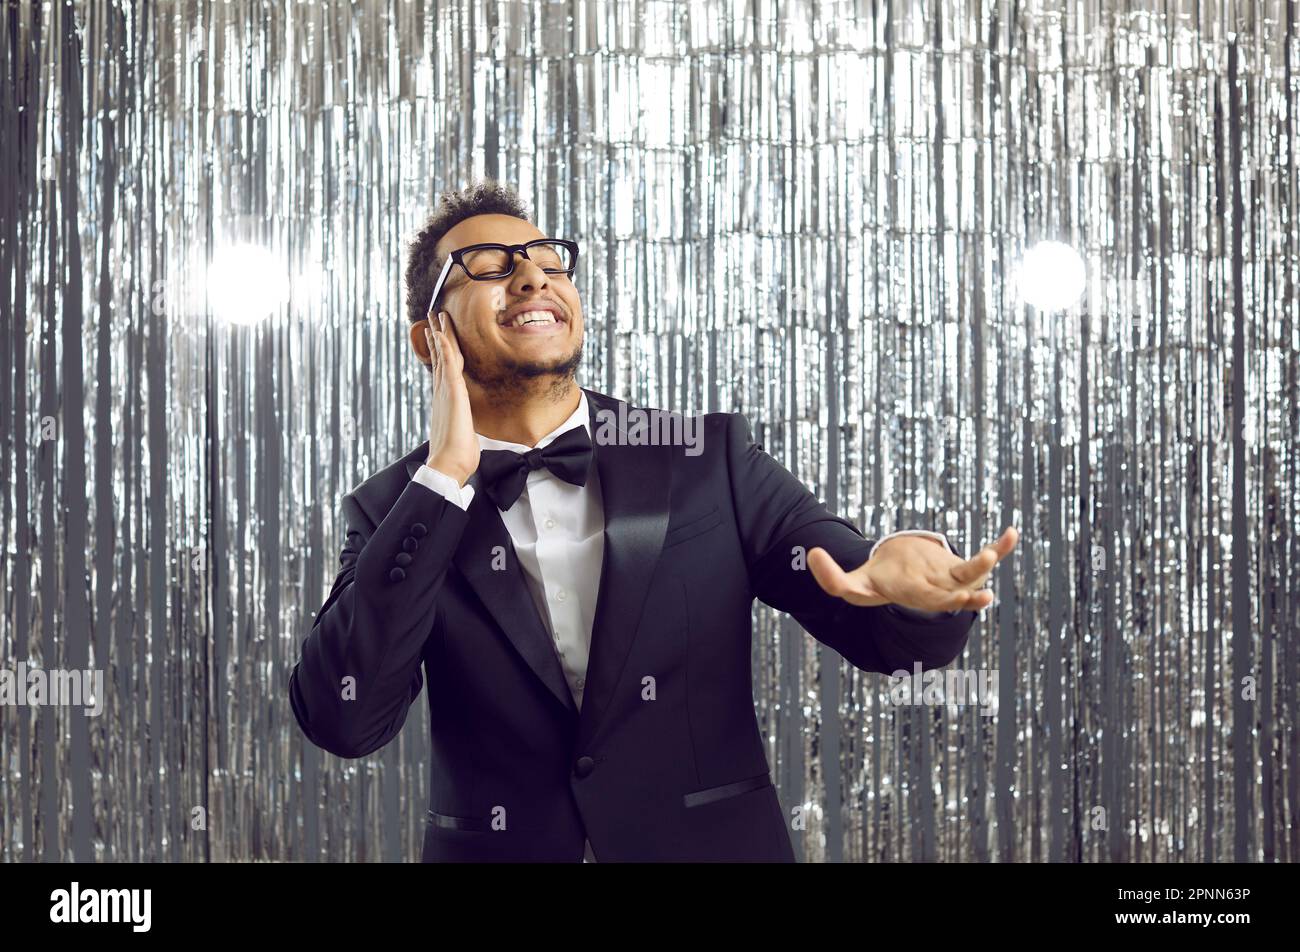 Happy funny young man in tuxedo having fun, smiling and dancing like DJ at party Stock Photo